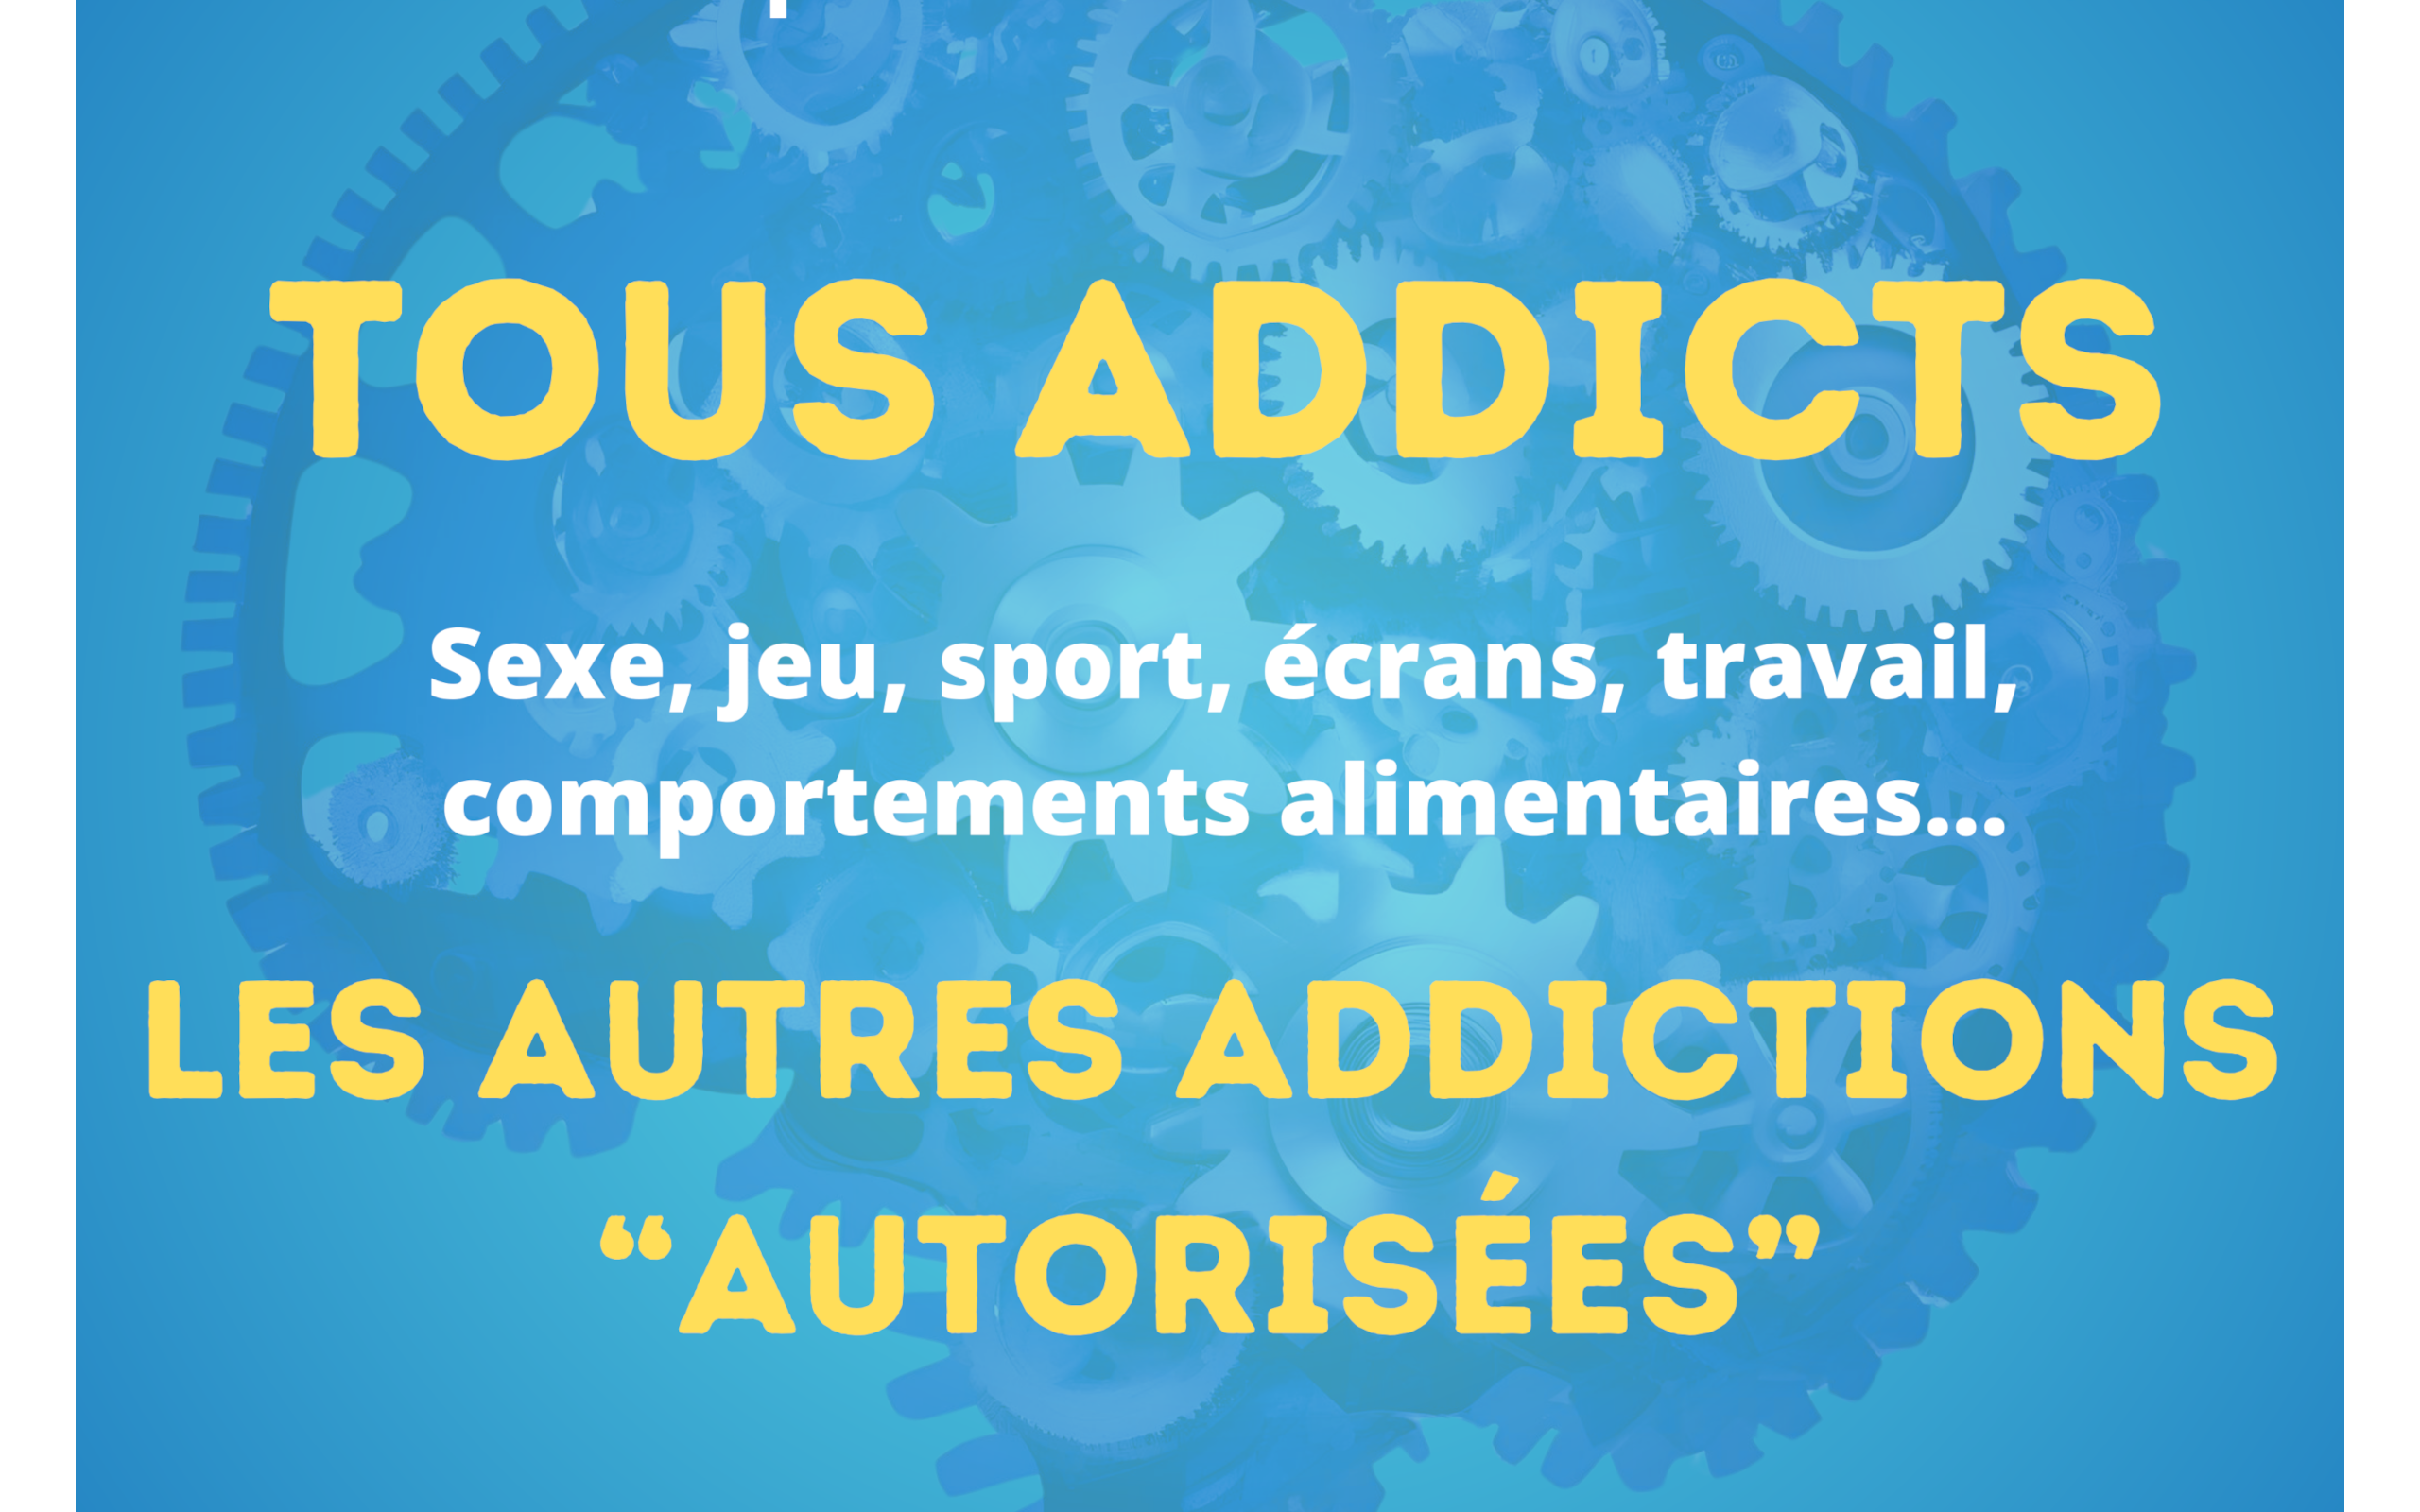 image_carrousel_tous_addicts